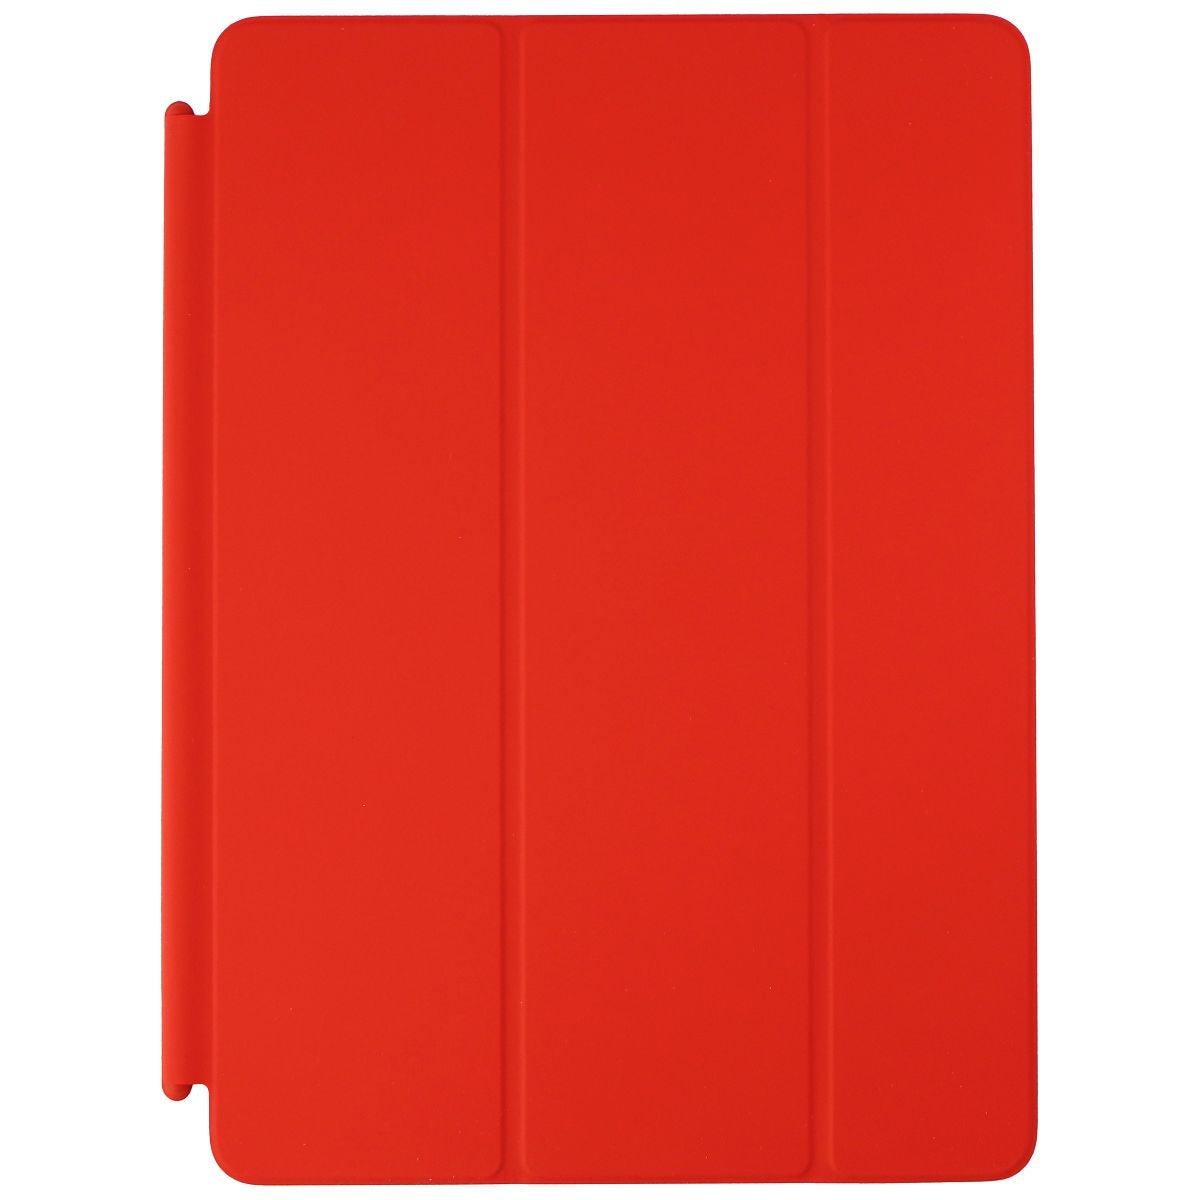 Apple iPad Smart Cover for iPad 9.7 6th/5th Gen and iPad Air 2 - Red iPad/Tablet Accessories - Cases, Covers, Keyboard Folios Apple    - Simple Cell Bulk Wholesale Pricing - USA Seller